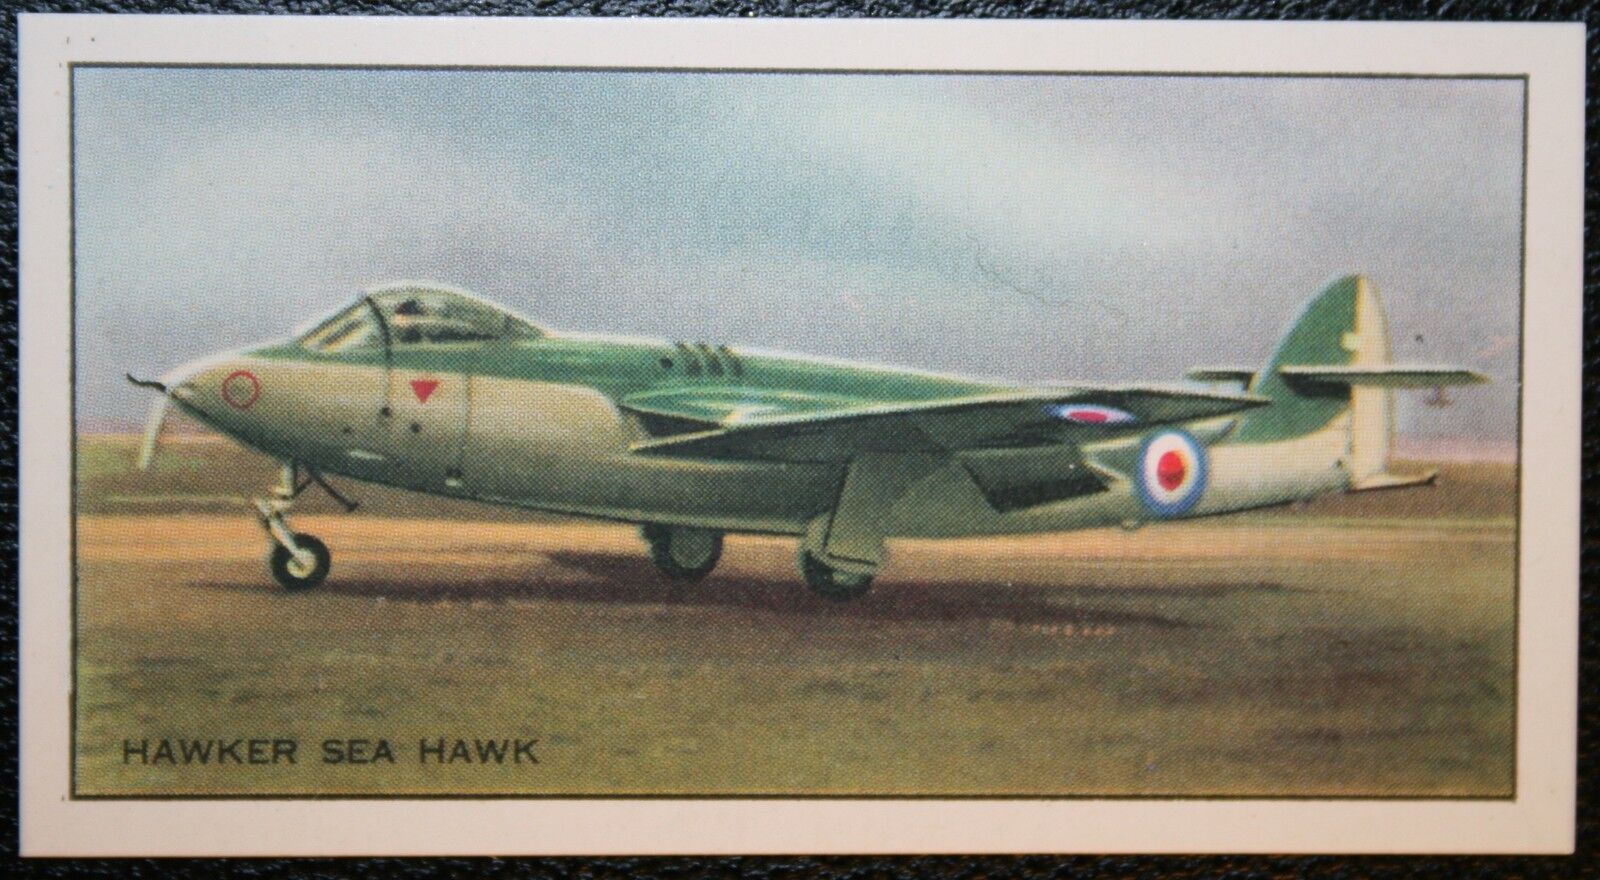 Hawker Sea Hawk   Royal Navy Jet Fighter  Vintage Picture Card